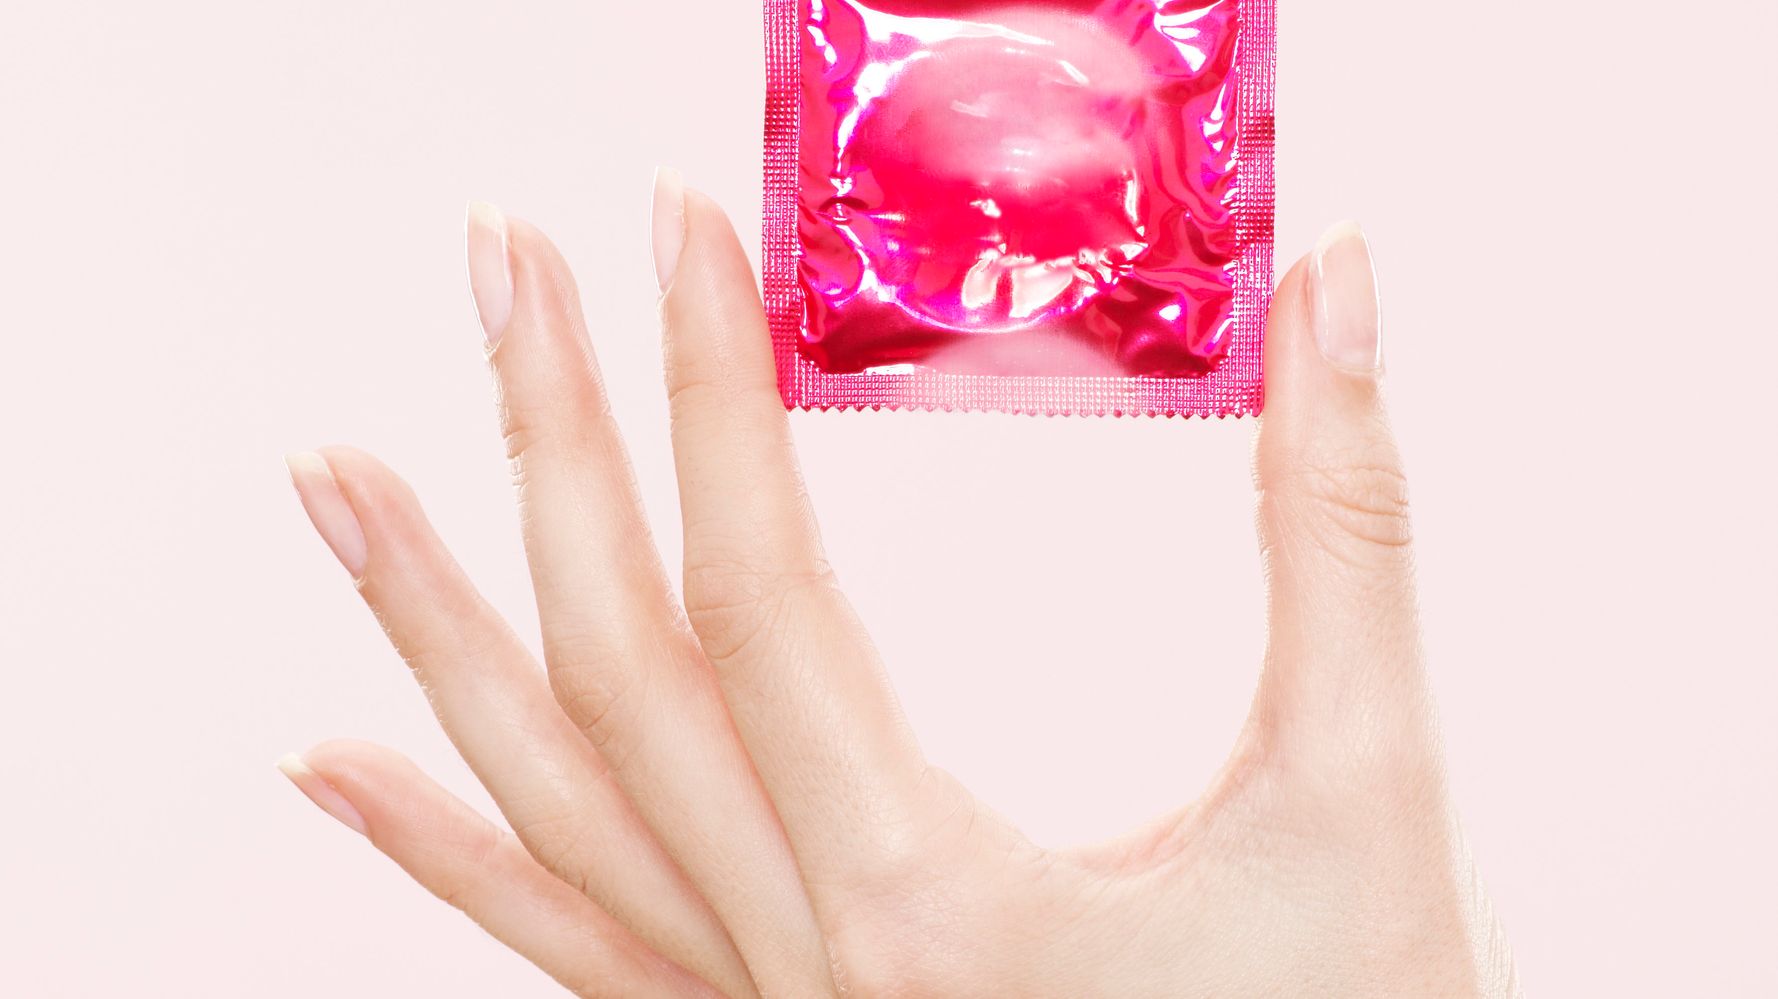 Stis Are Spreading Through Oral Sex As Very Few People Use Condoms